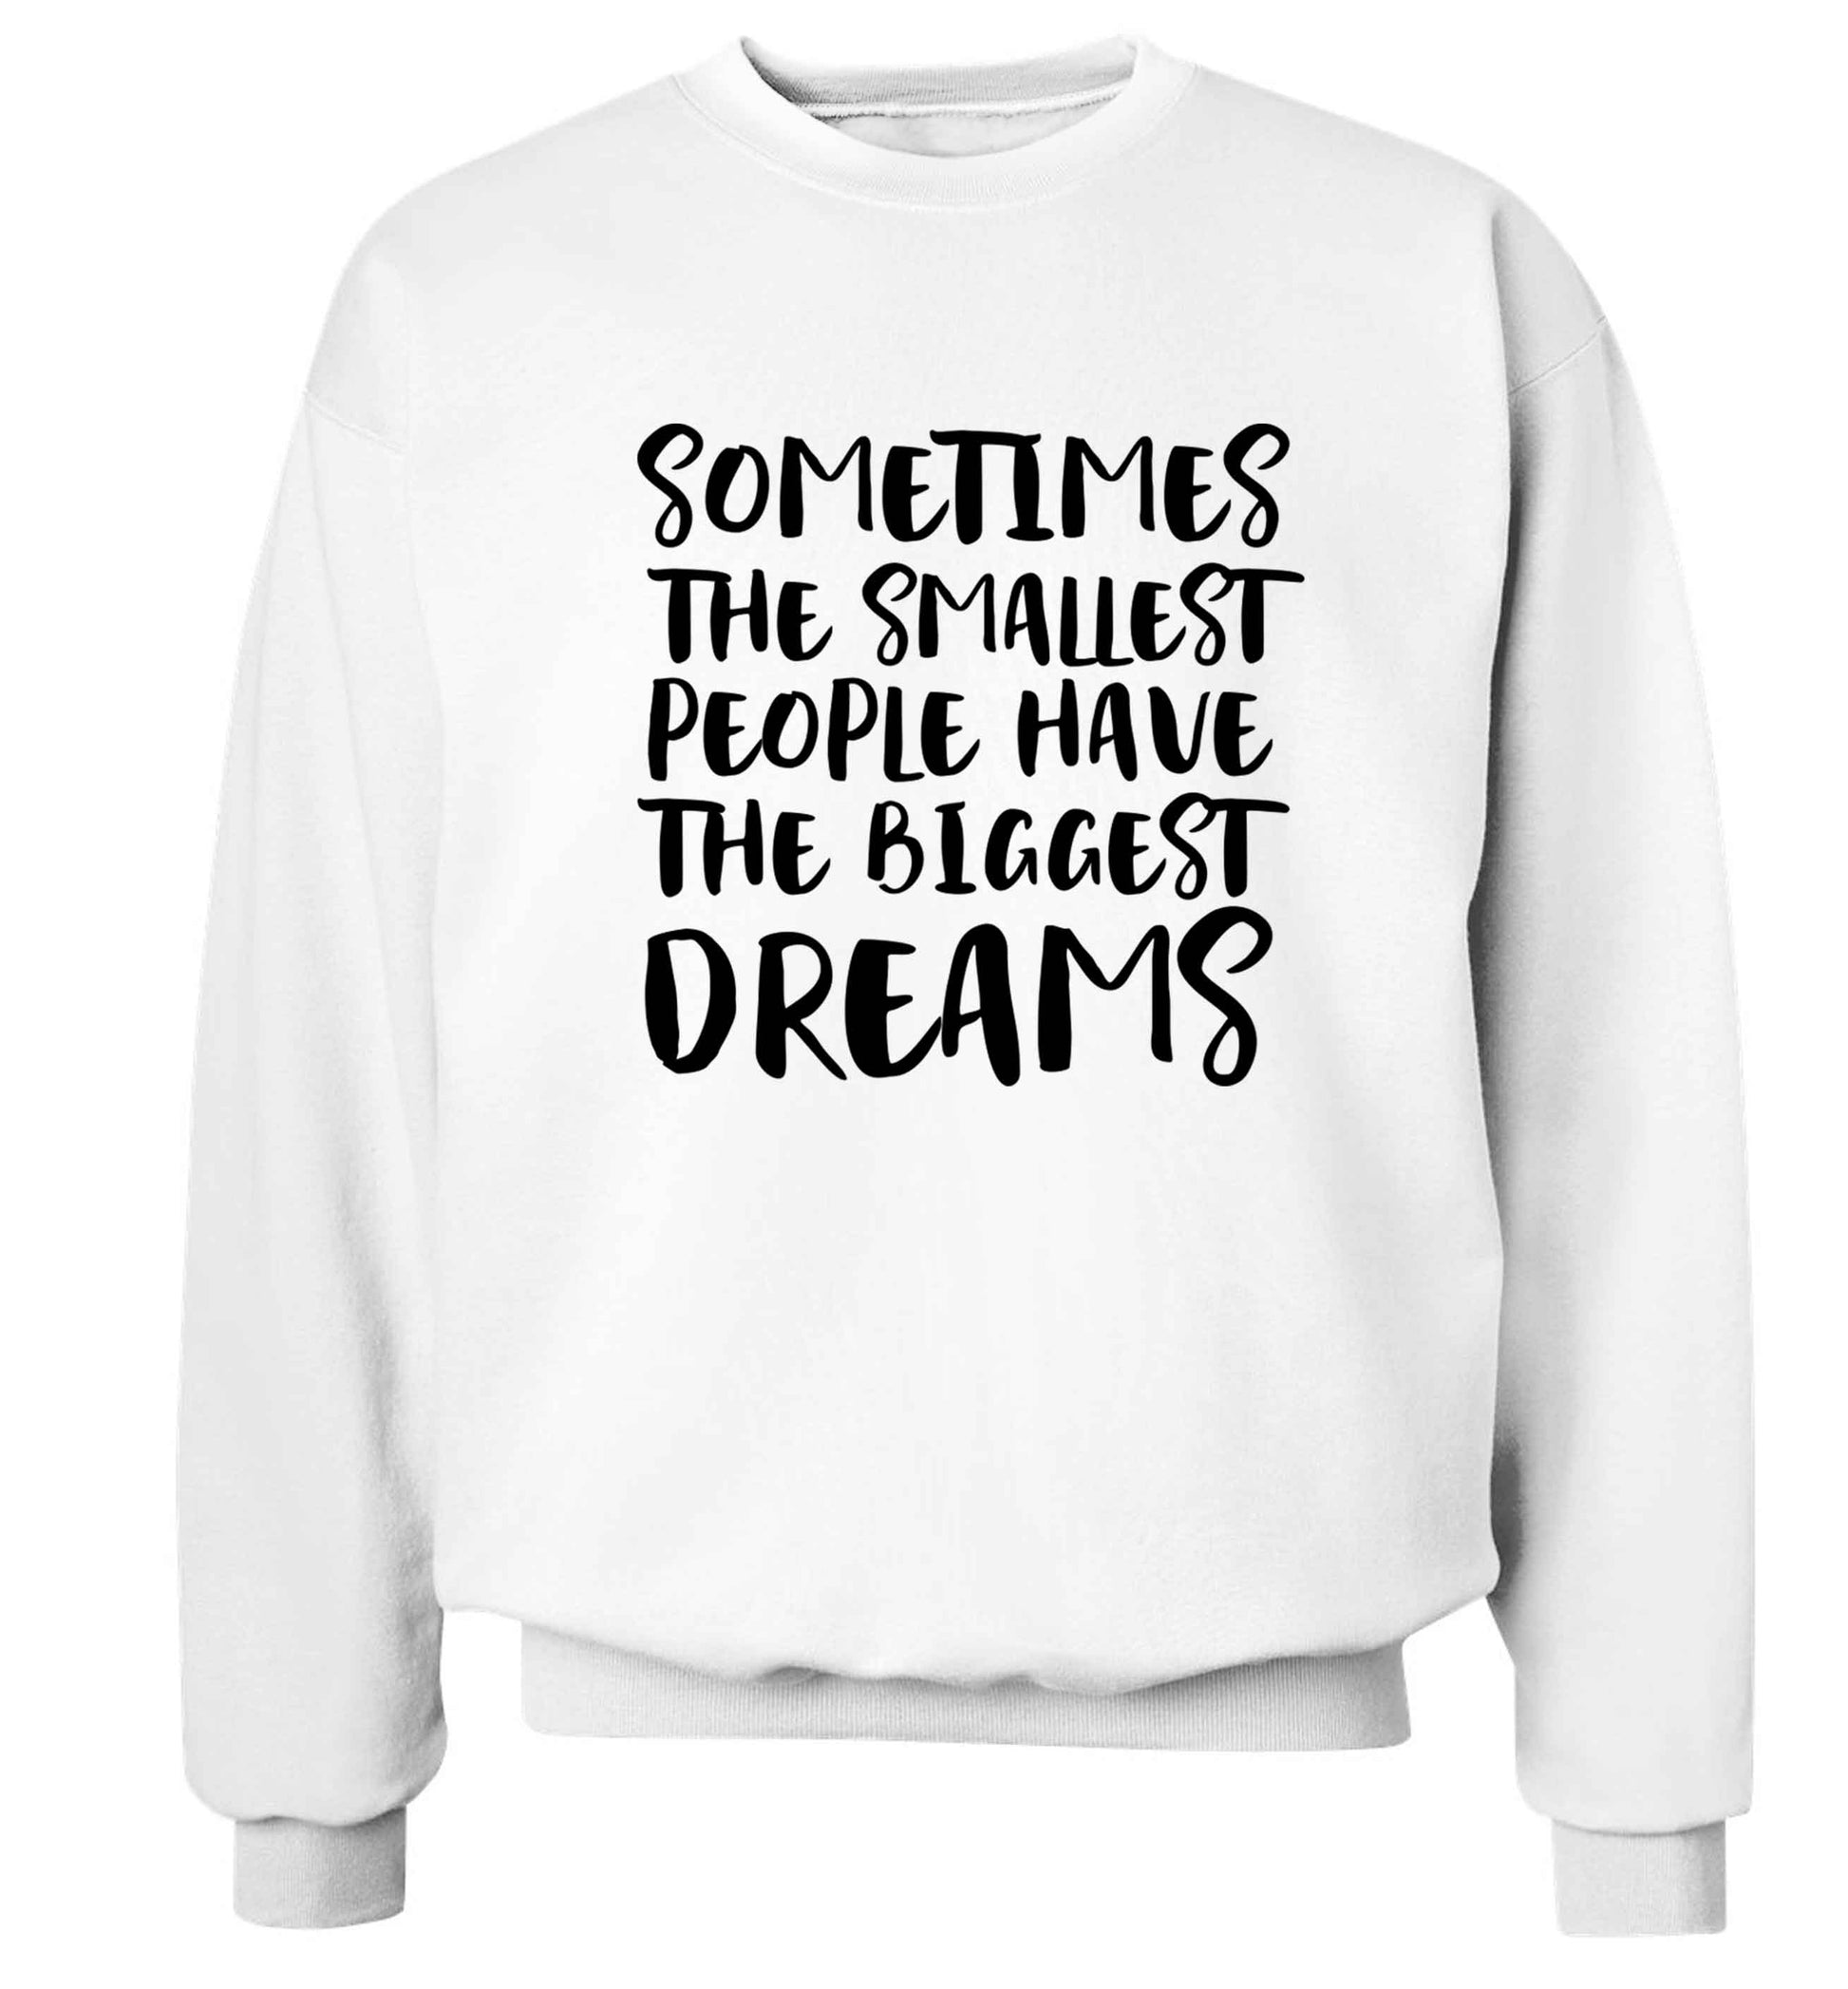 Sometimes the smallest people have the biggest dreams Adult's unisex white Sweater 2XL